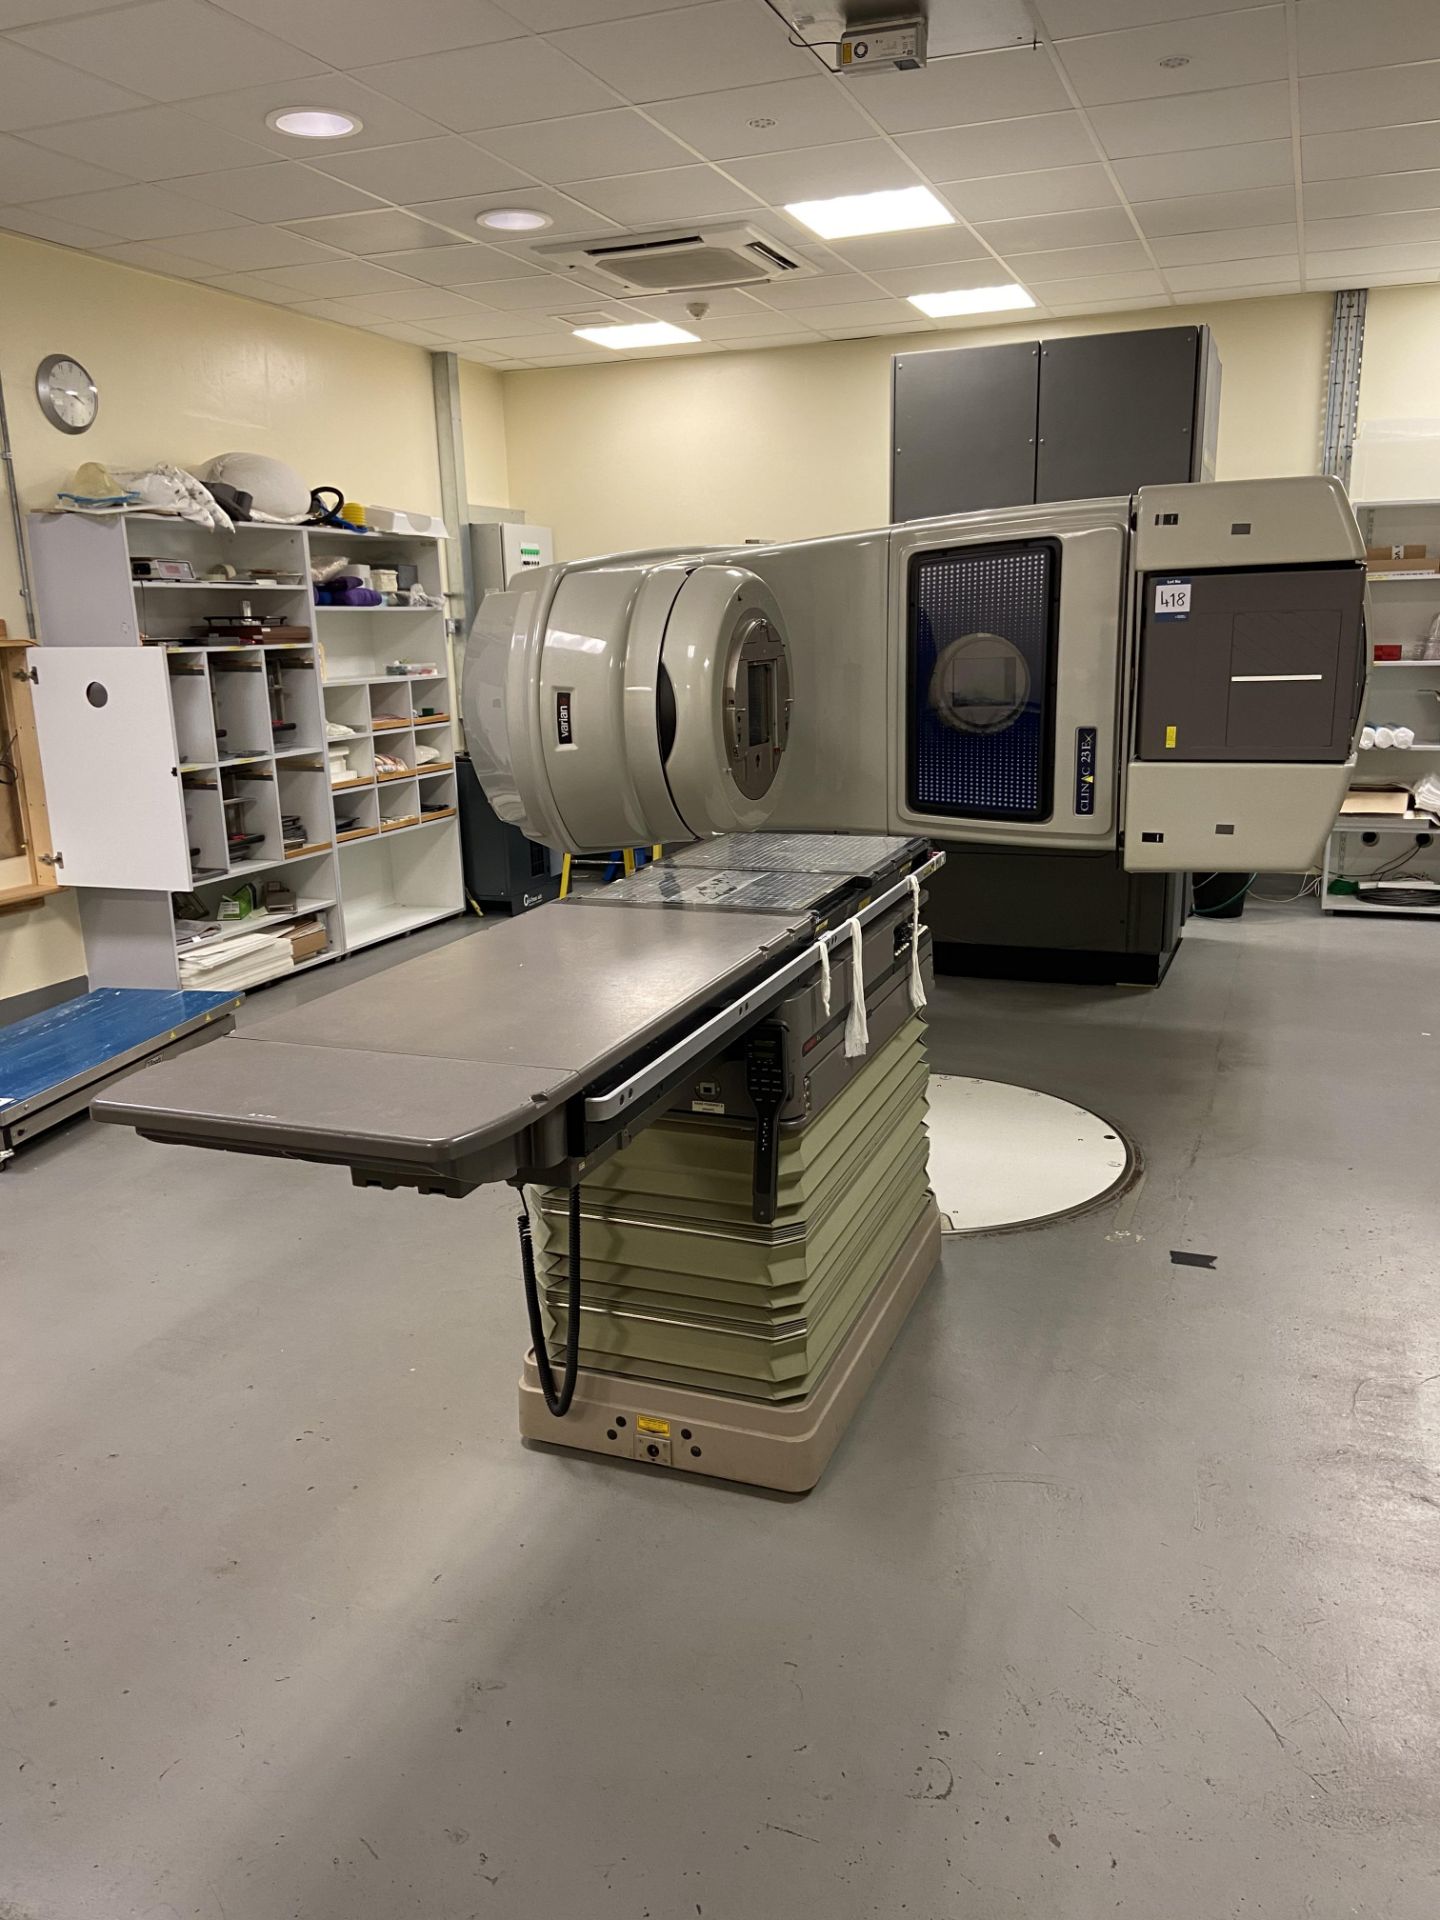 Varian clinac 23EX linear accelerator with Exact carbon fibre & stainless steel patient bed,